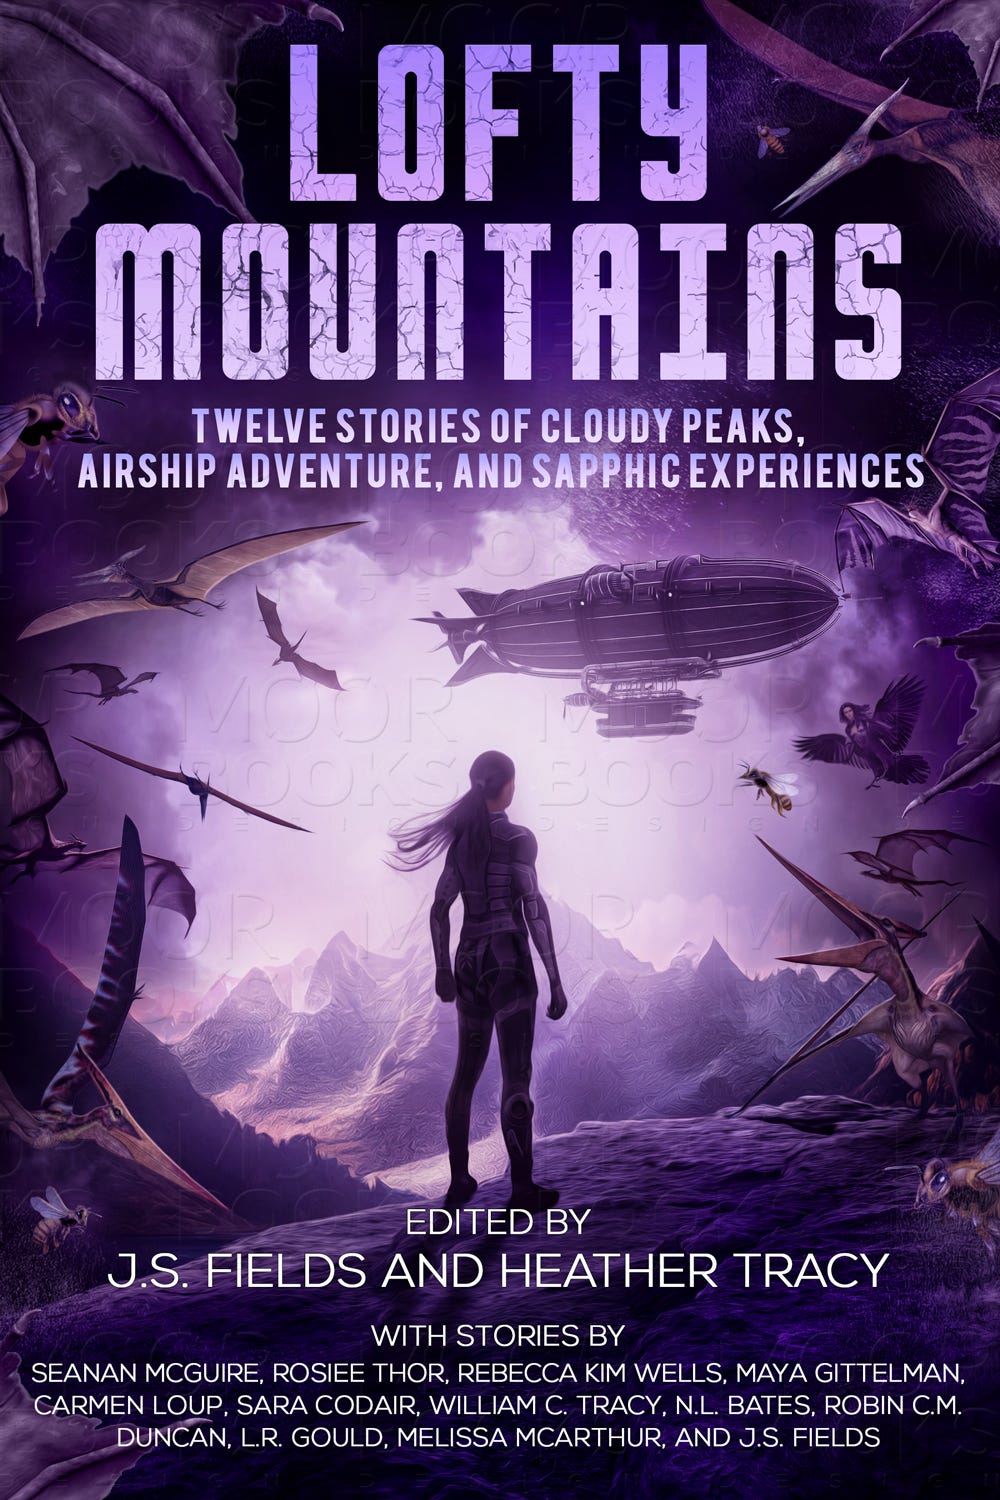 Cover for LOFTY MOUNTAINS: a silhouette of a woman before a purple hued backdrop of mountains and cloudy sky full of winged creatures and an airship. 
Text reads: 
LOFTY MOUNTAINS
Twelve Stories of Cloudy Peaks, Airship Adventure, and Sapphic experiences
Edited by J.S. Fields and Heather Tracy
With stories by Seanan Mcguire, Rosiee Thor, Rebecca Kim Wells, Maya Gittelman, Carmen Loup, Sara Codair, William C. Tracy, N.L. Bates, Robin C.M. Duncan, L.R. Gould, Melissa McArthur, and J.S. Fields